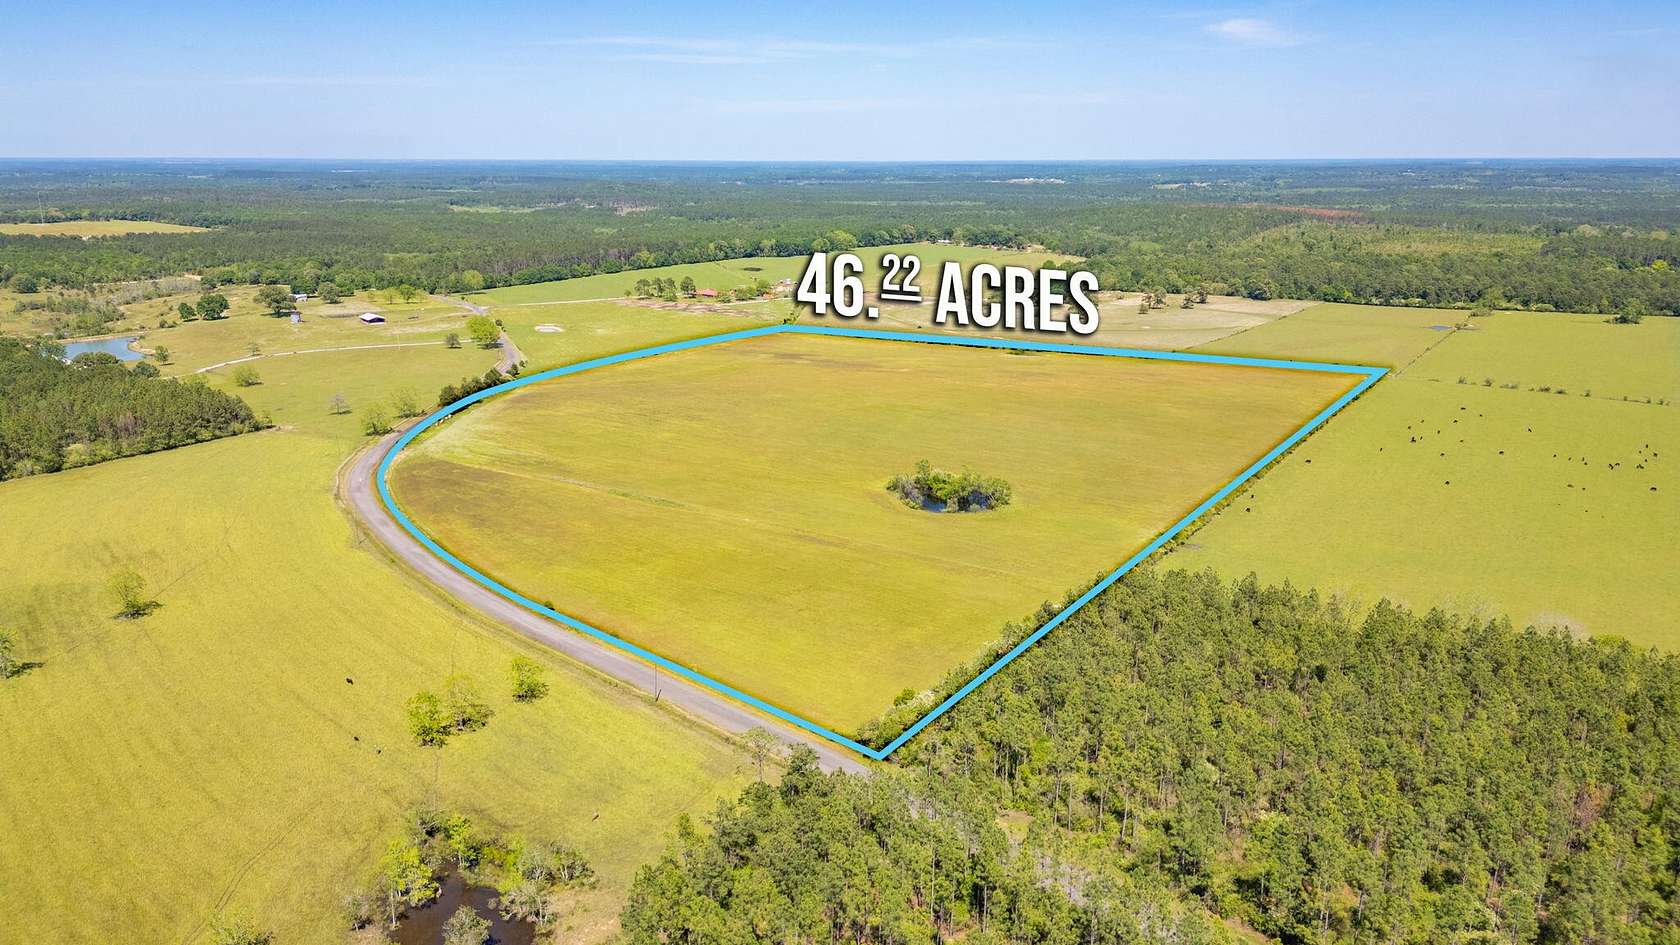 46.2 Acres of Agricultural Land for Sale in DeFuniak Springs, Florida